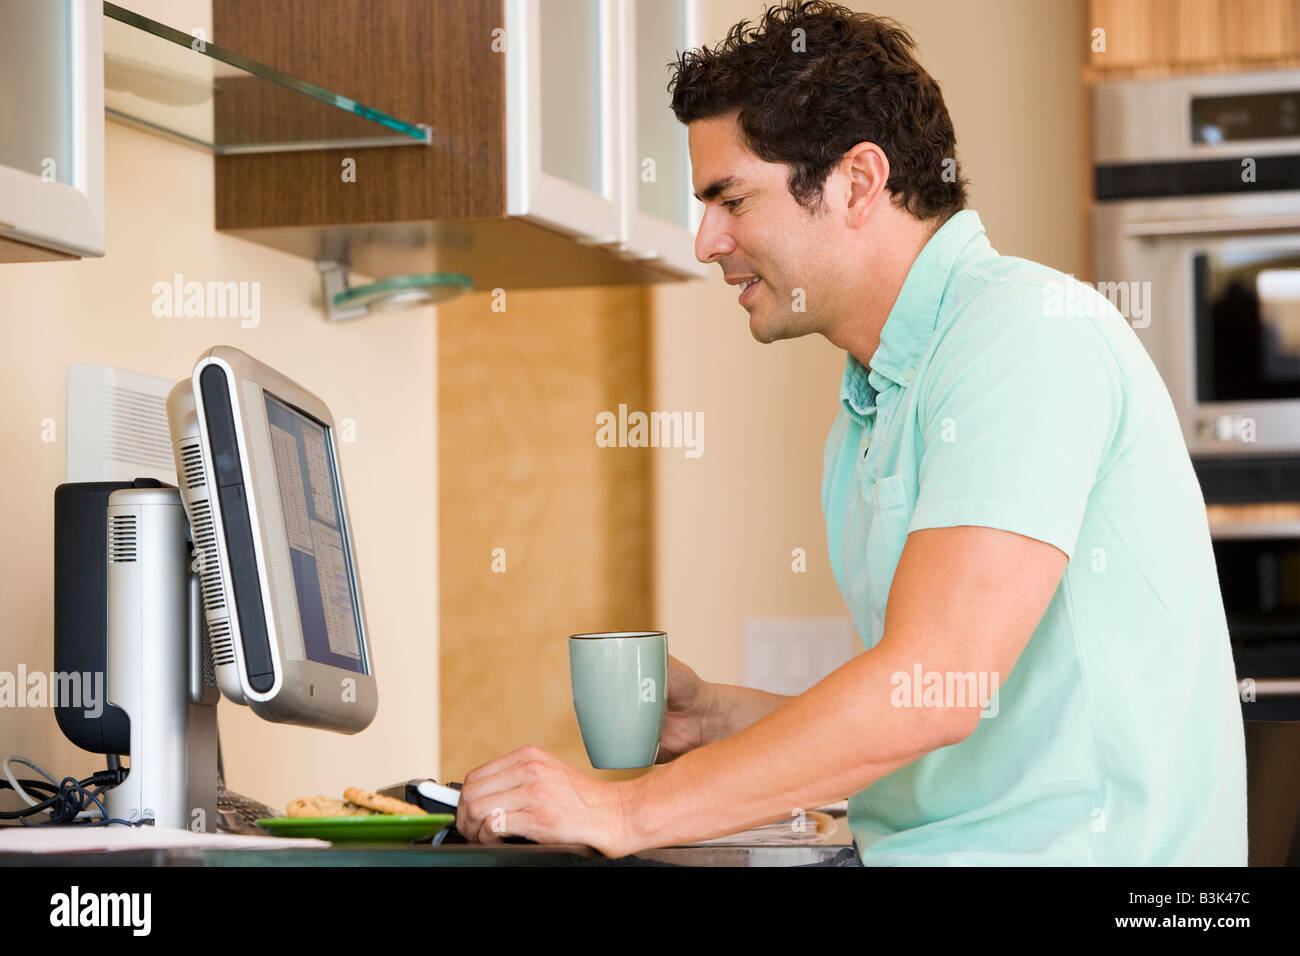 Man in kitchen with coffee using computer and smiling Stock Photo